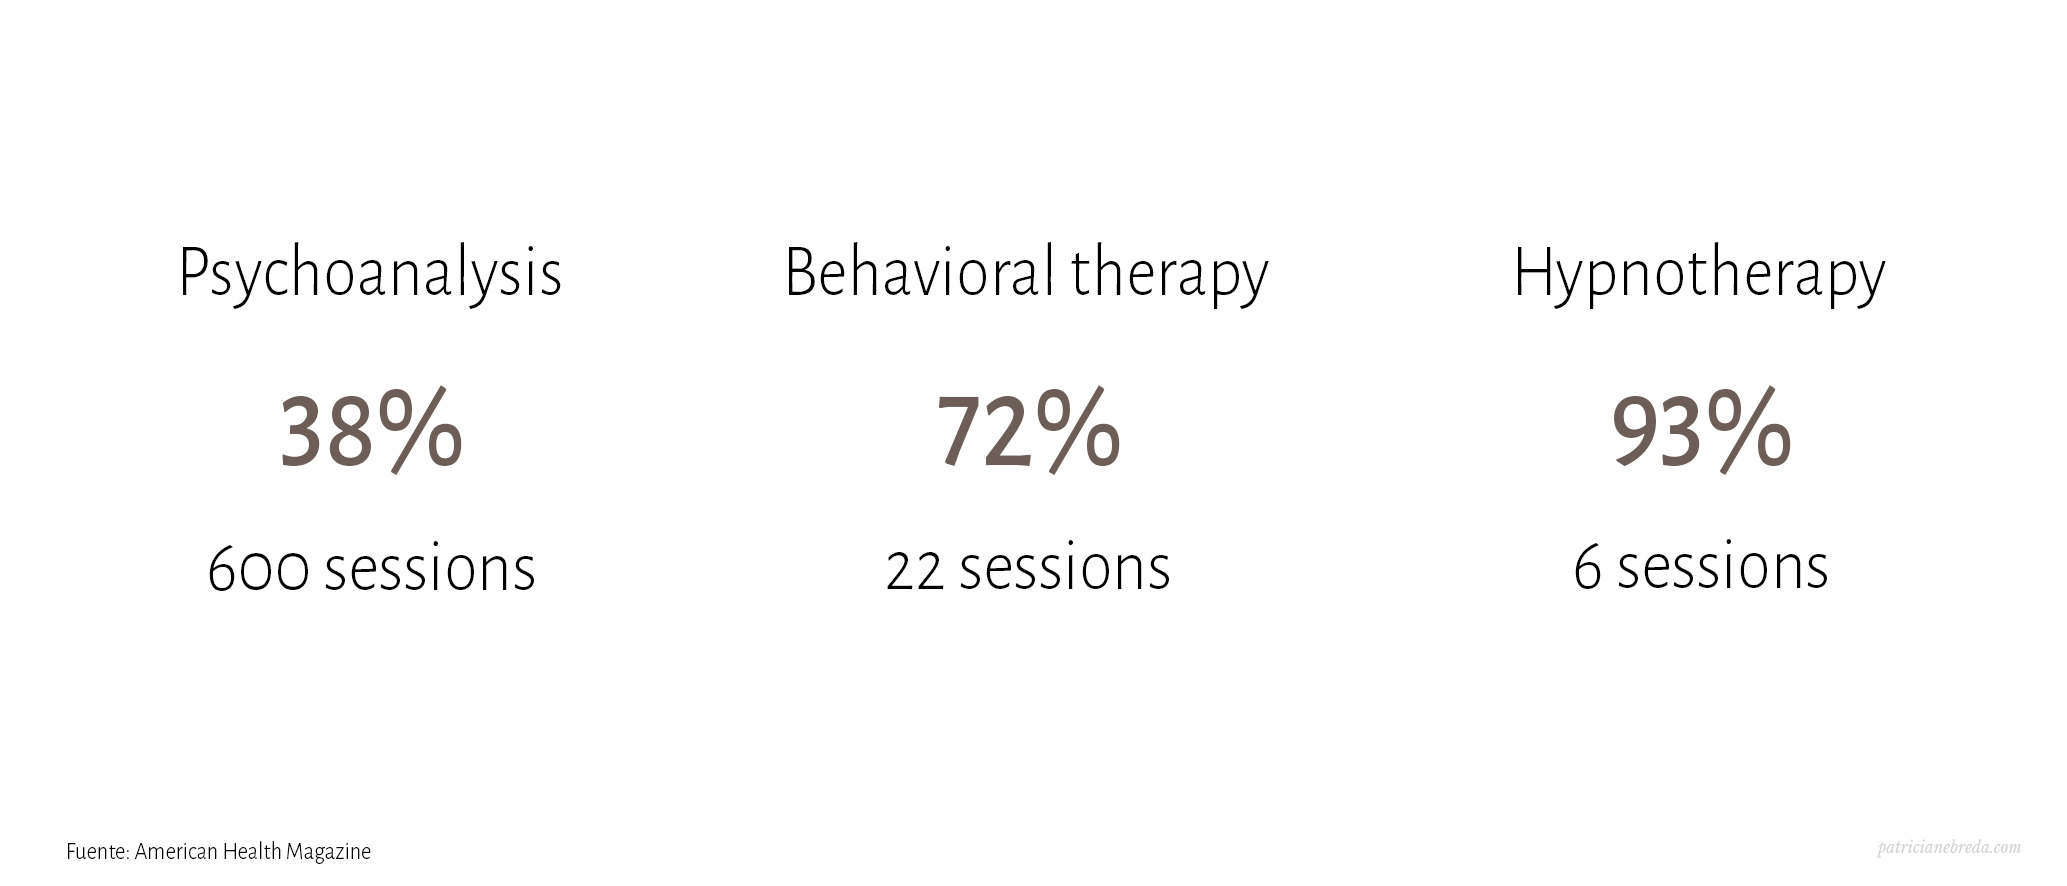 hypnotherapy, Behavioral therapy & pyschoanalysis